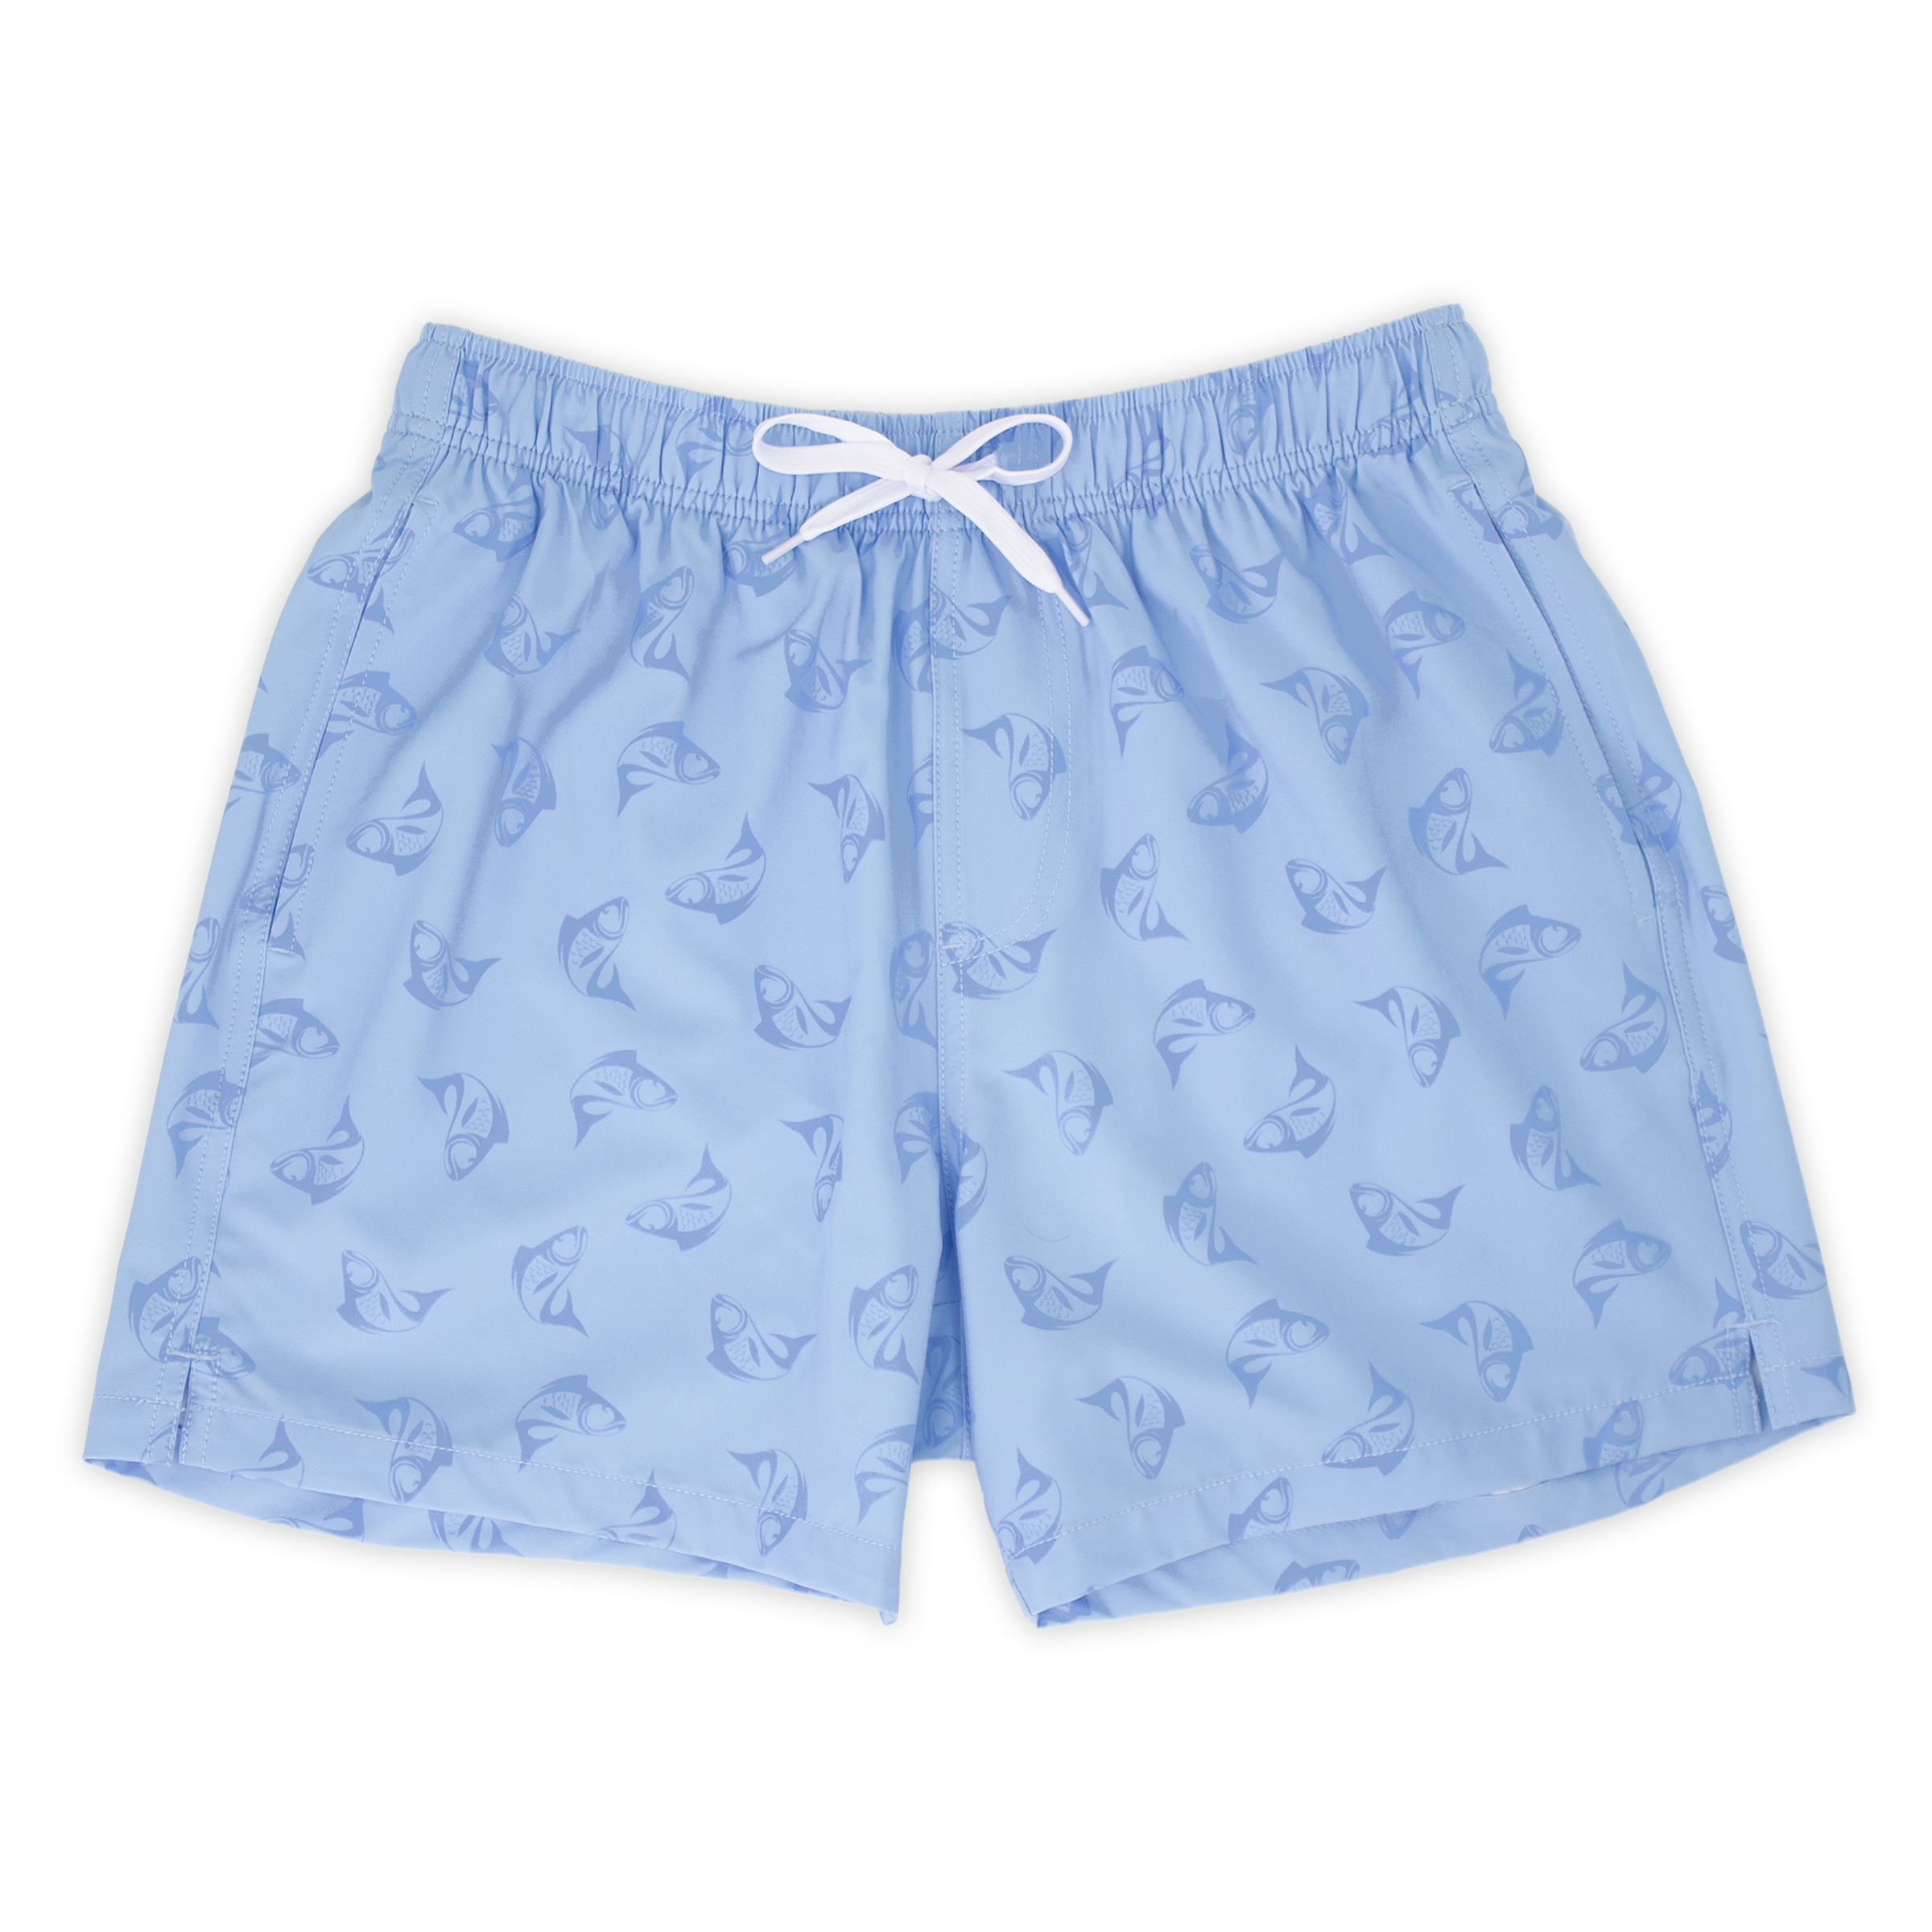 Stretch Swim 5.5" Bonita front, a light periwinkle blue with a print of darker blue sketched fish with an elastic waistband, two inseam pockets, and a white drawstring